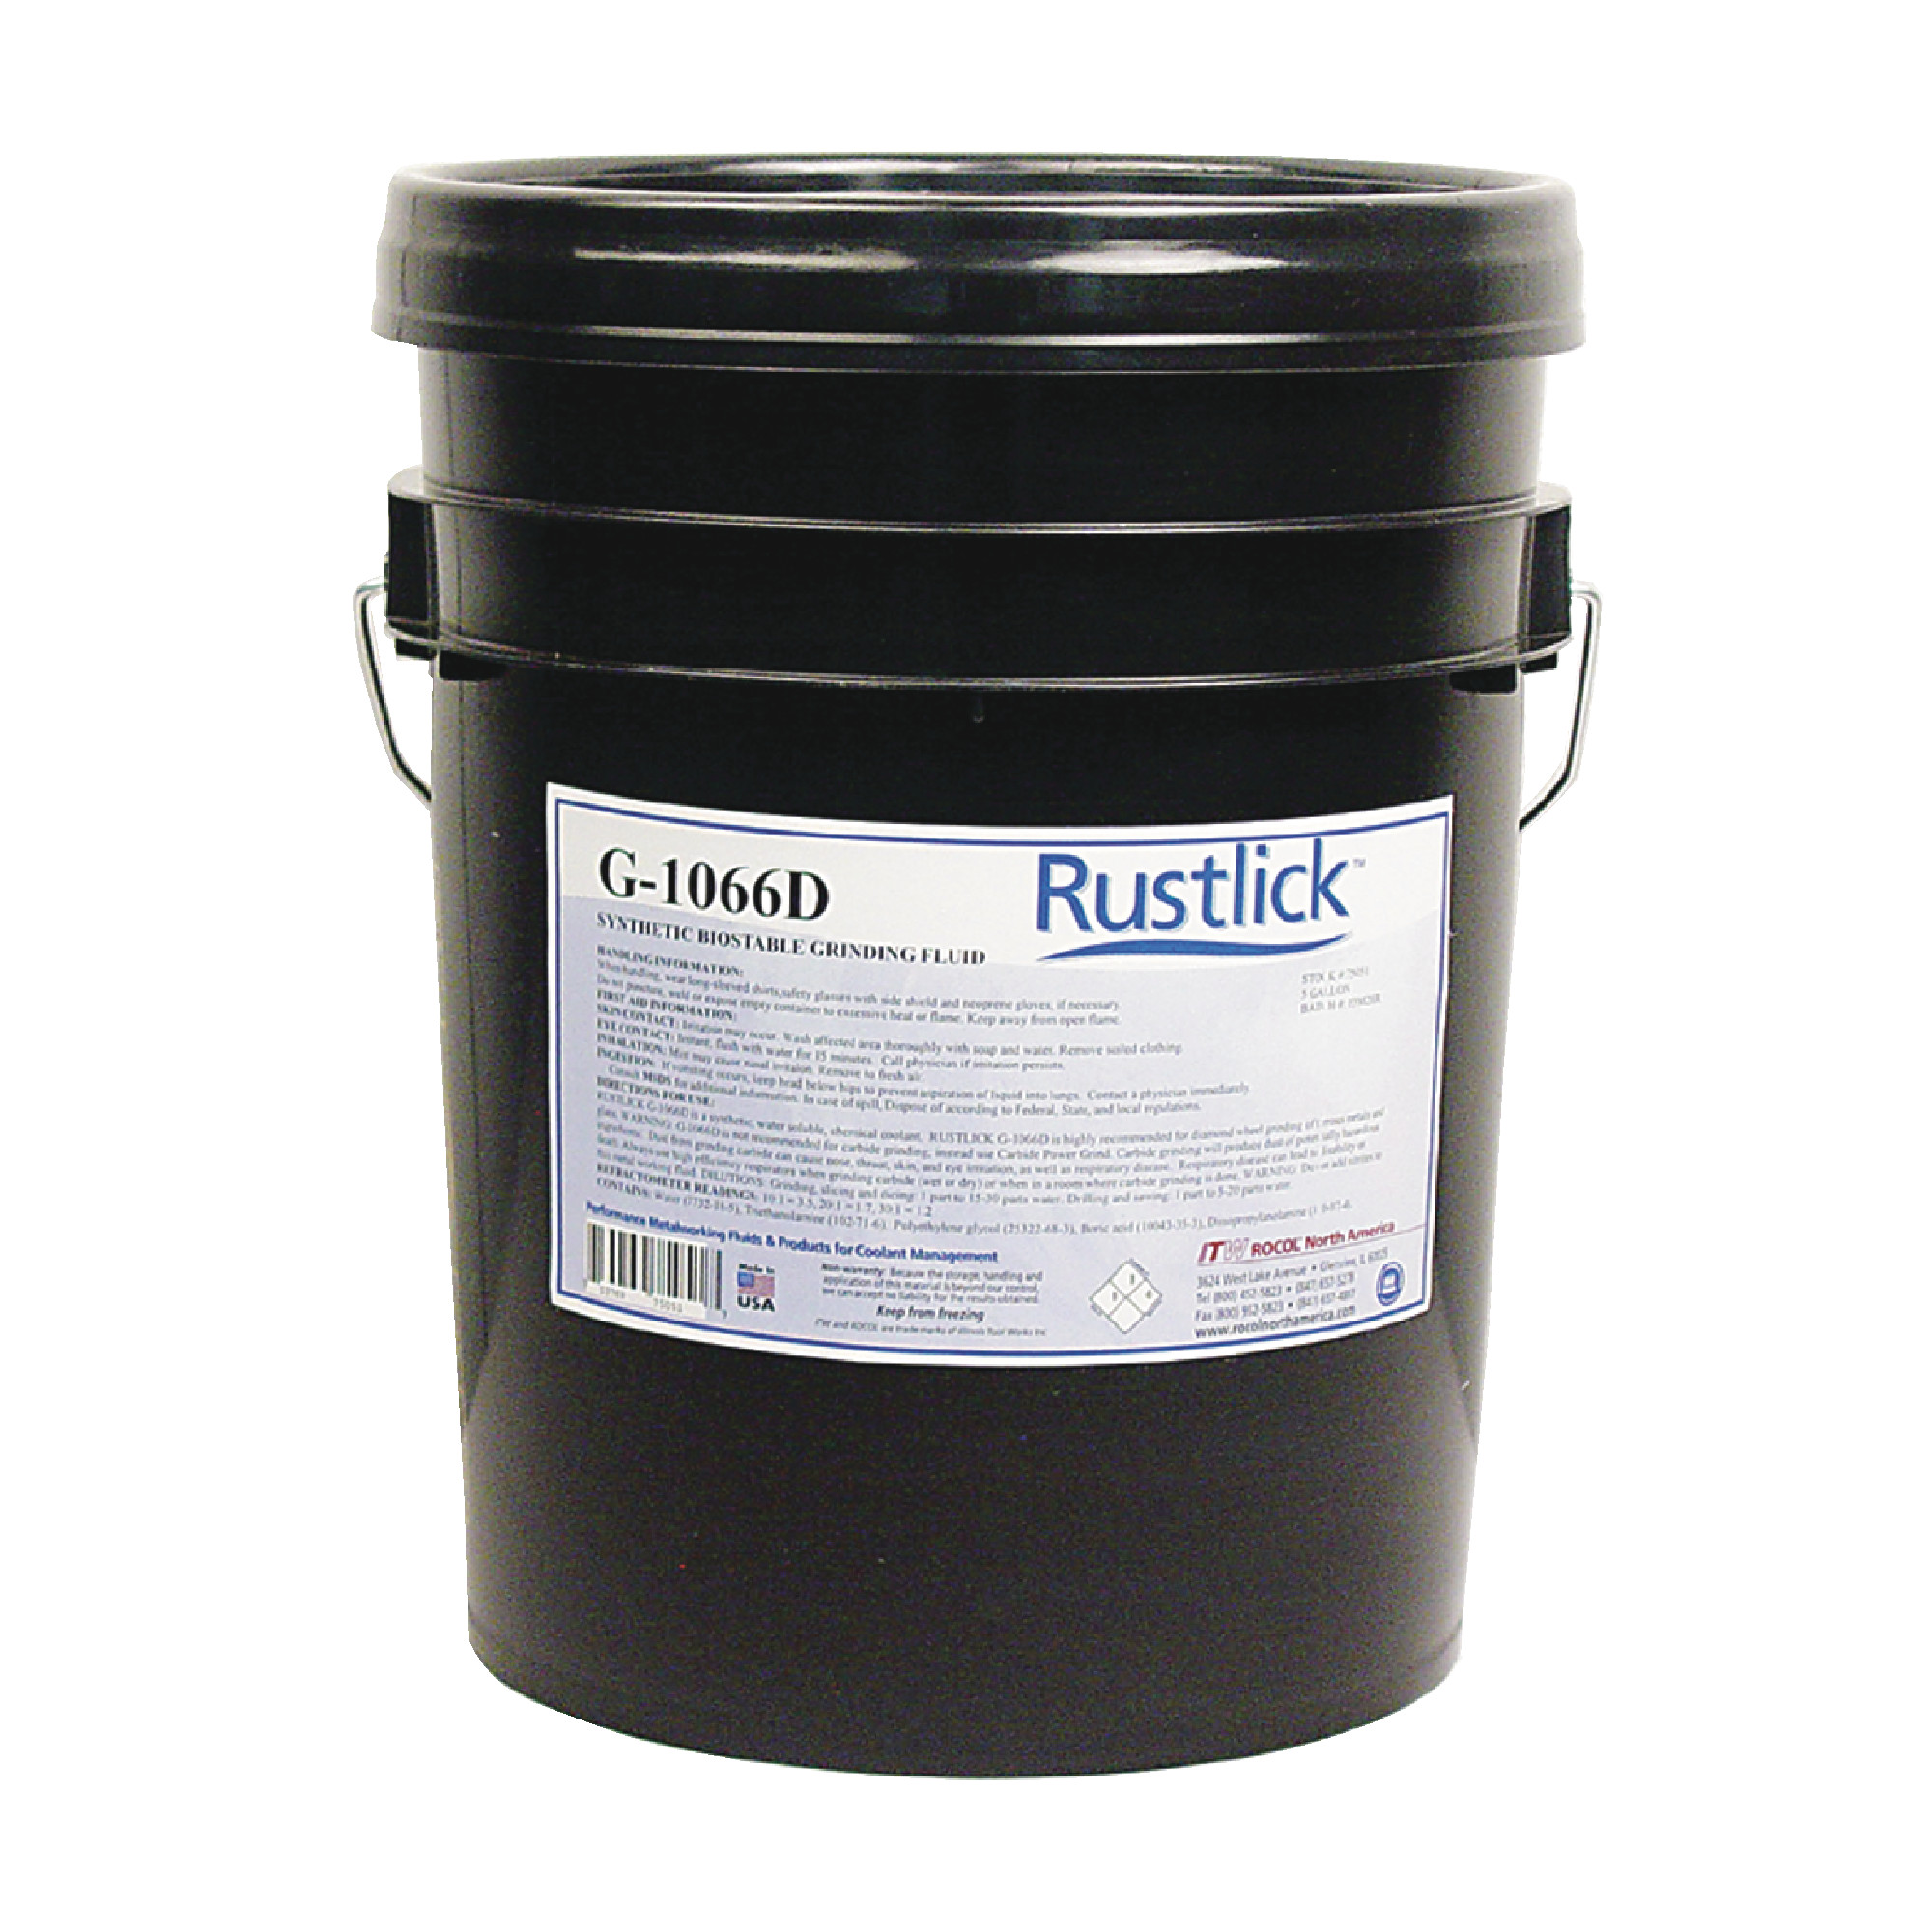 G-1066D Synthetic Grinding Coolant